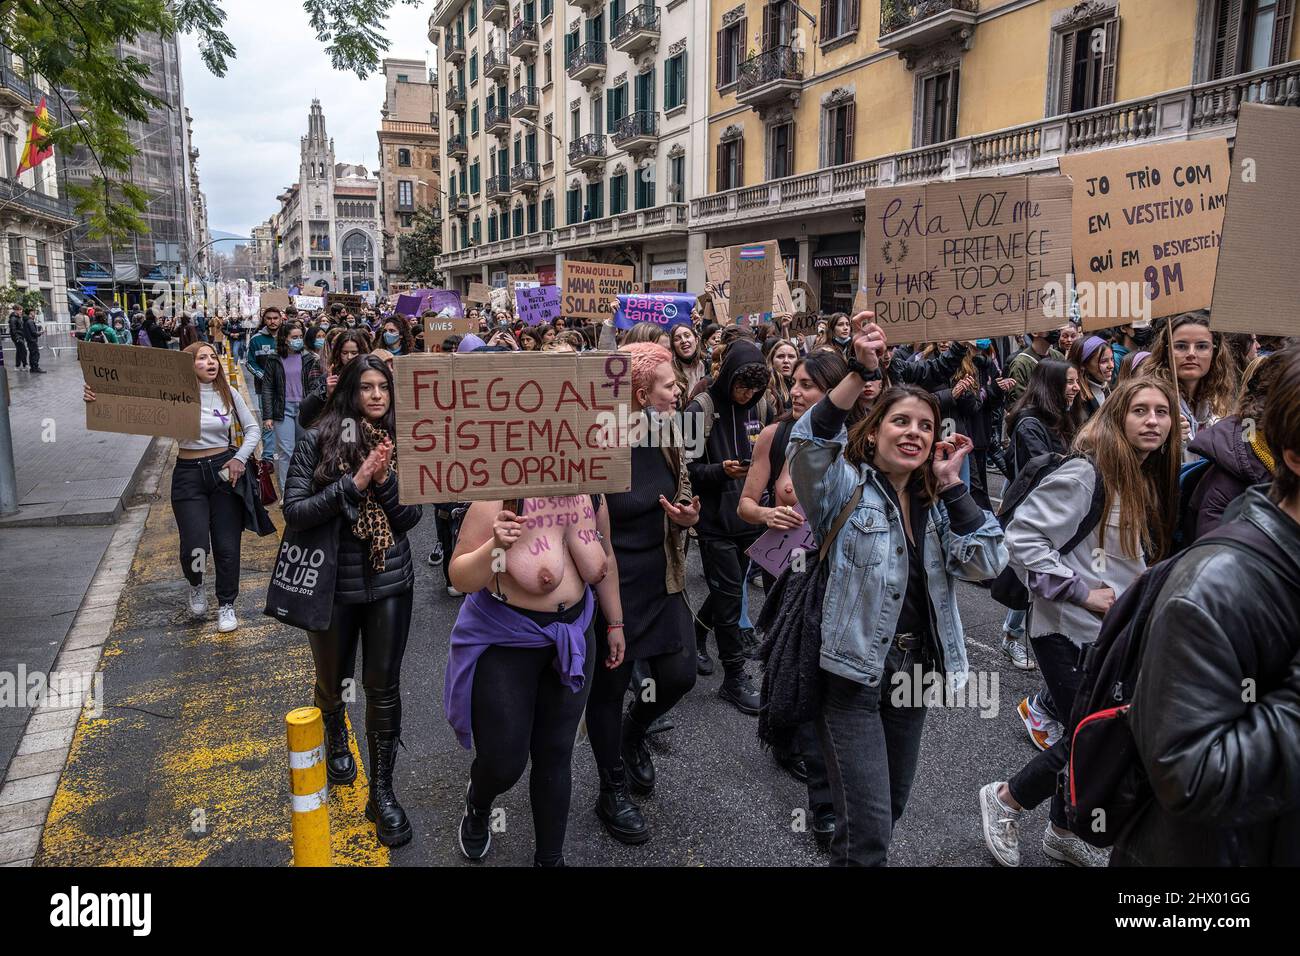 Editors Note Image Depicts Nudity A Crowd Of Protesters Is Seen Holding Placards As They 